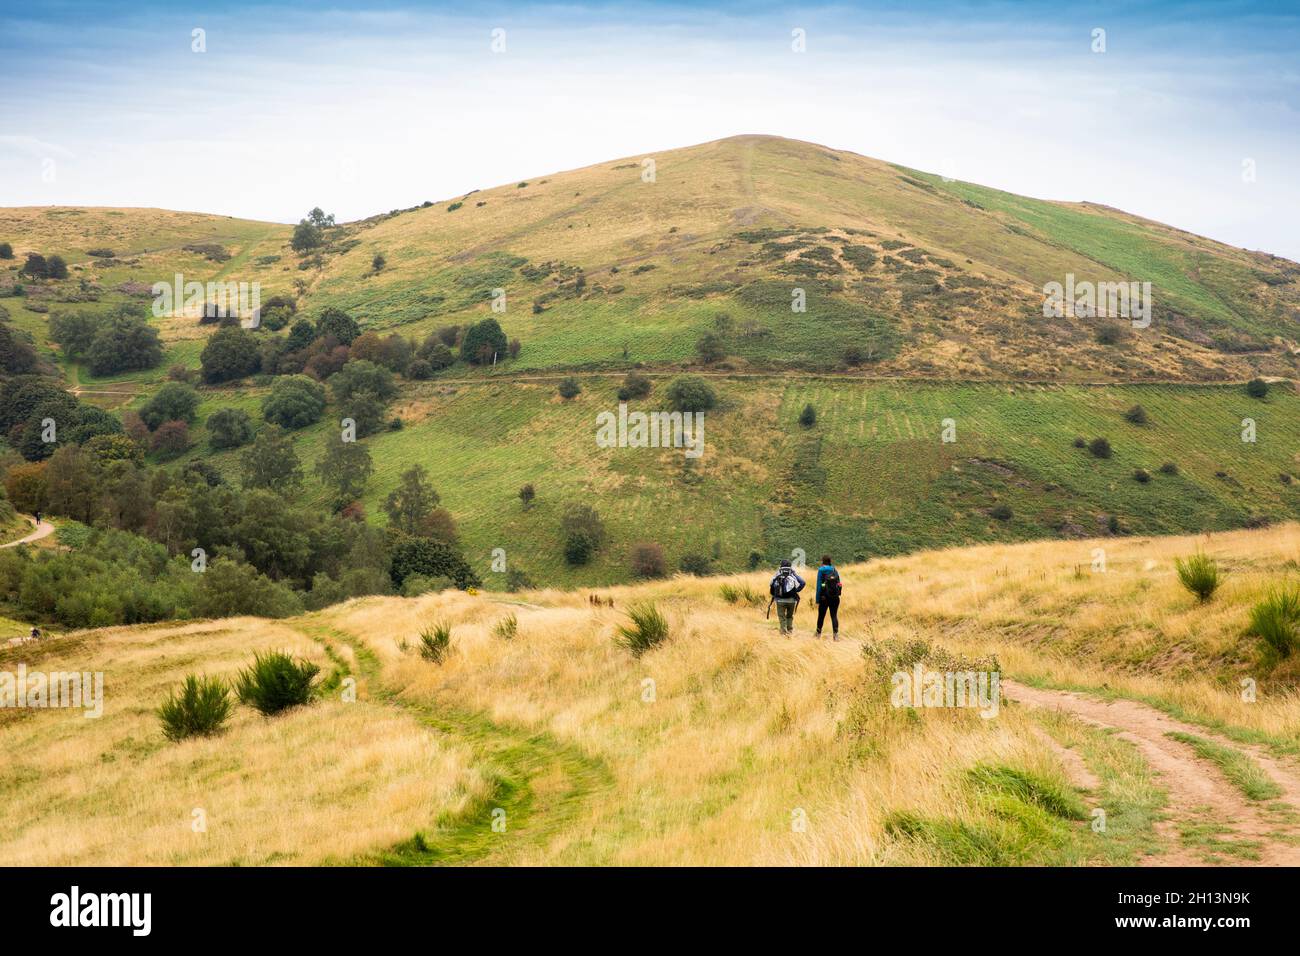 UK, England, Worcestershire, Malvern Hills, walkers on footpath descending from Worcestershire Beacon to Malvern Stock Photo